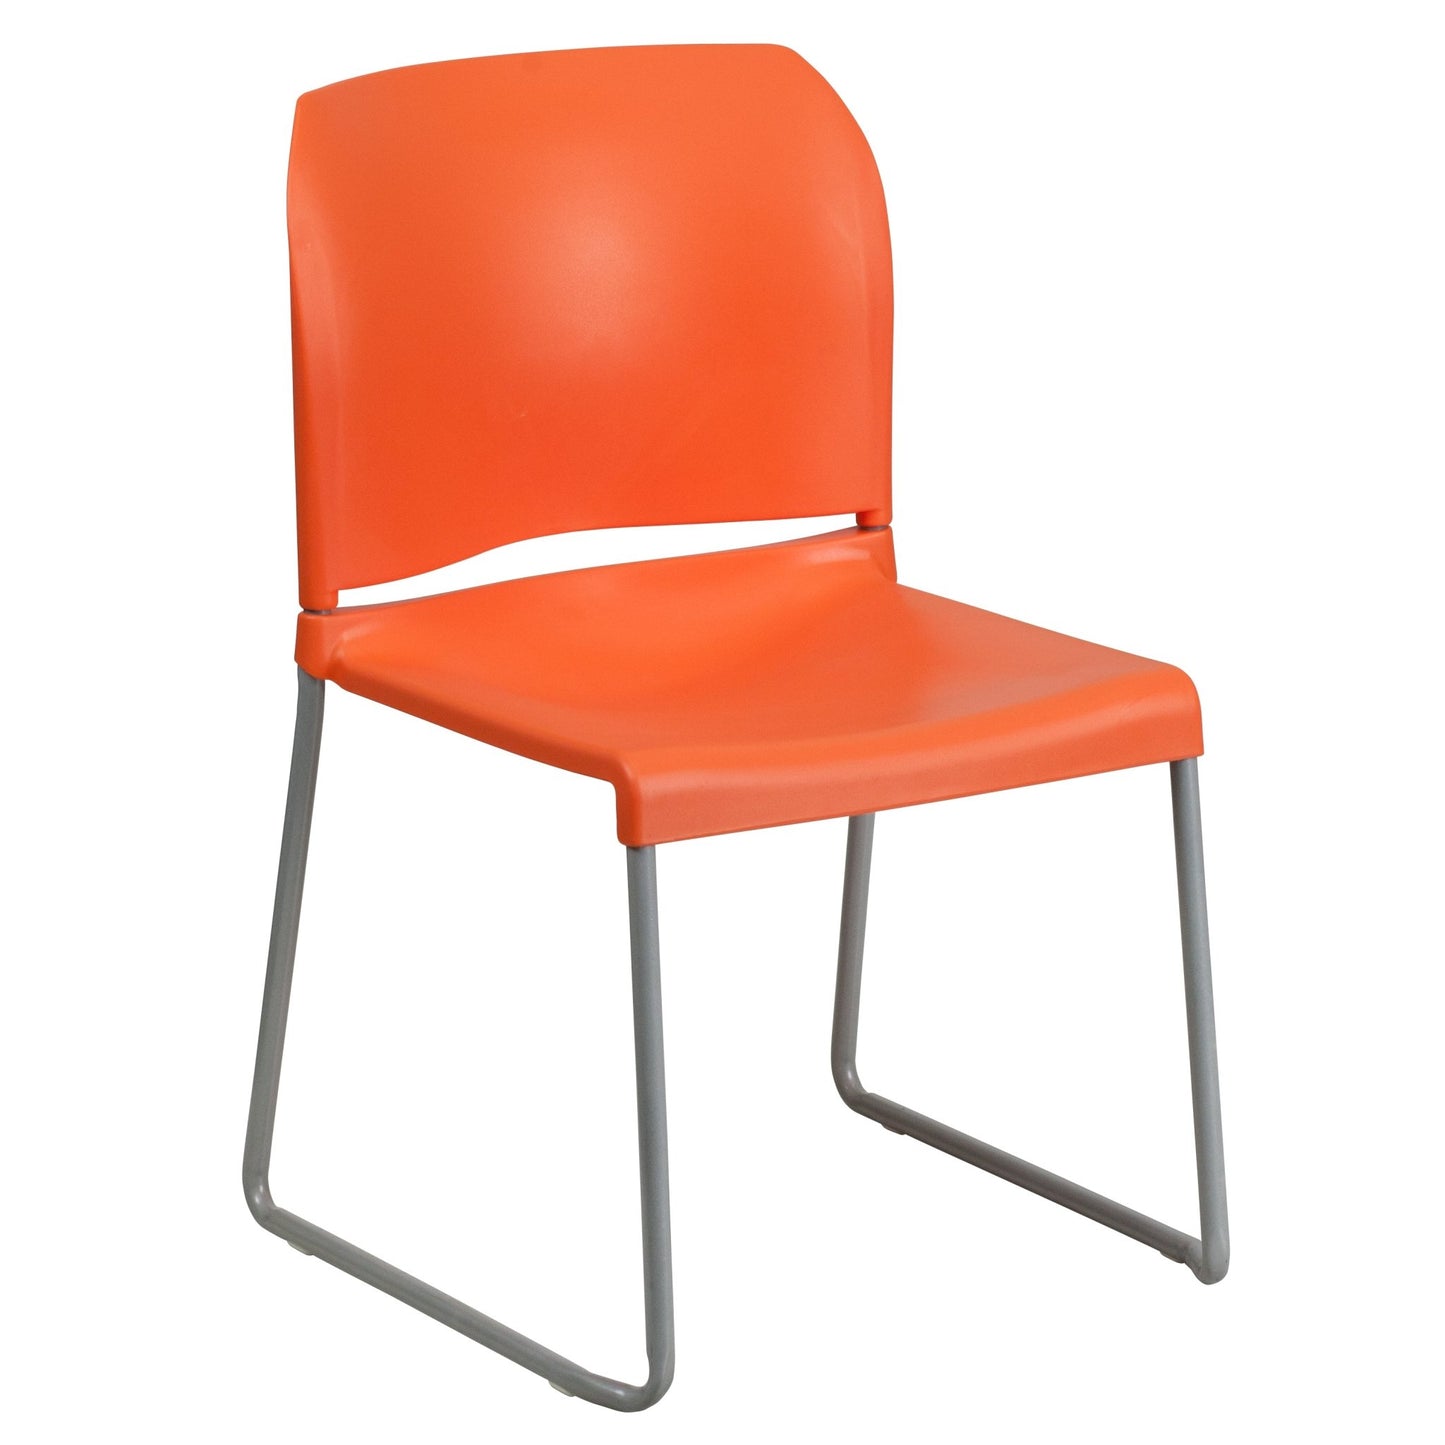 HERCULES Series 880 lb. Capacity Full Back Contoured Stack Chair with Powder Coated Sled Base - SchoolOutlet